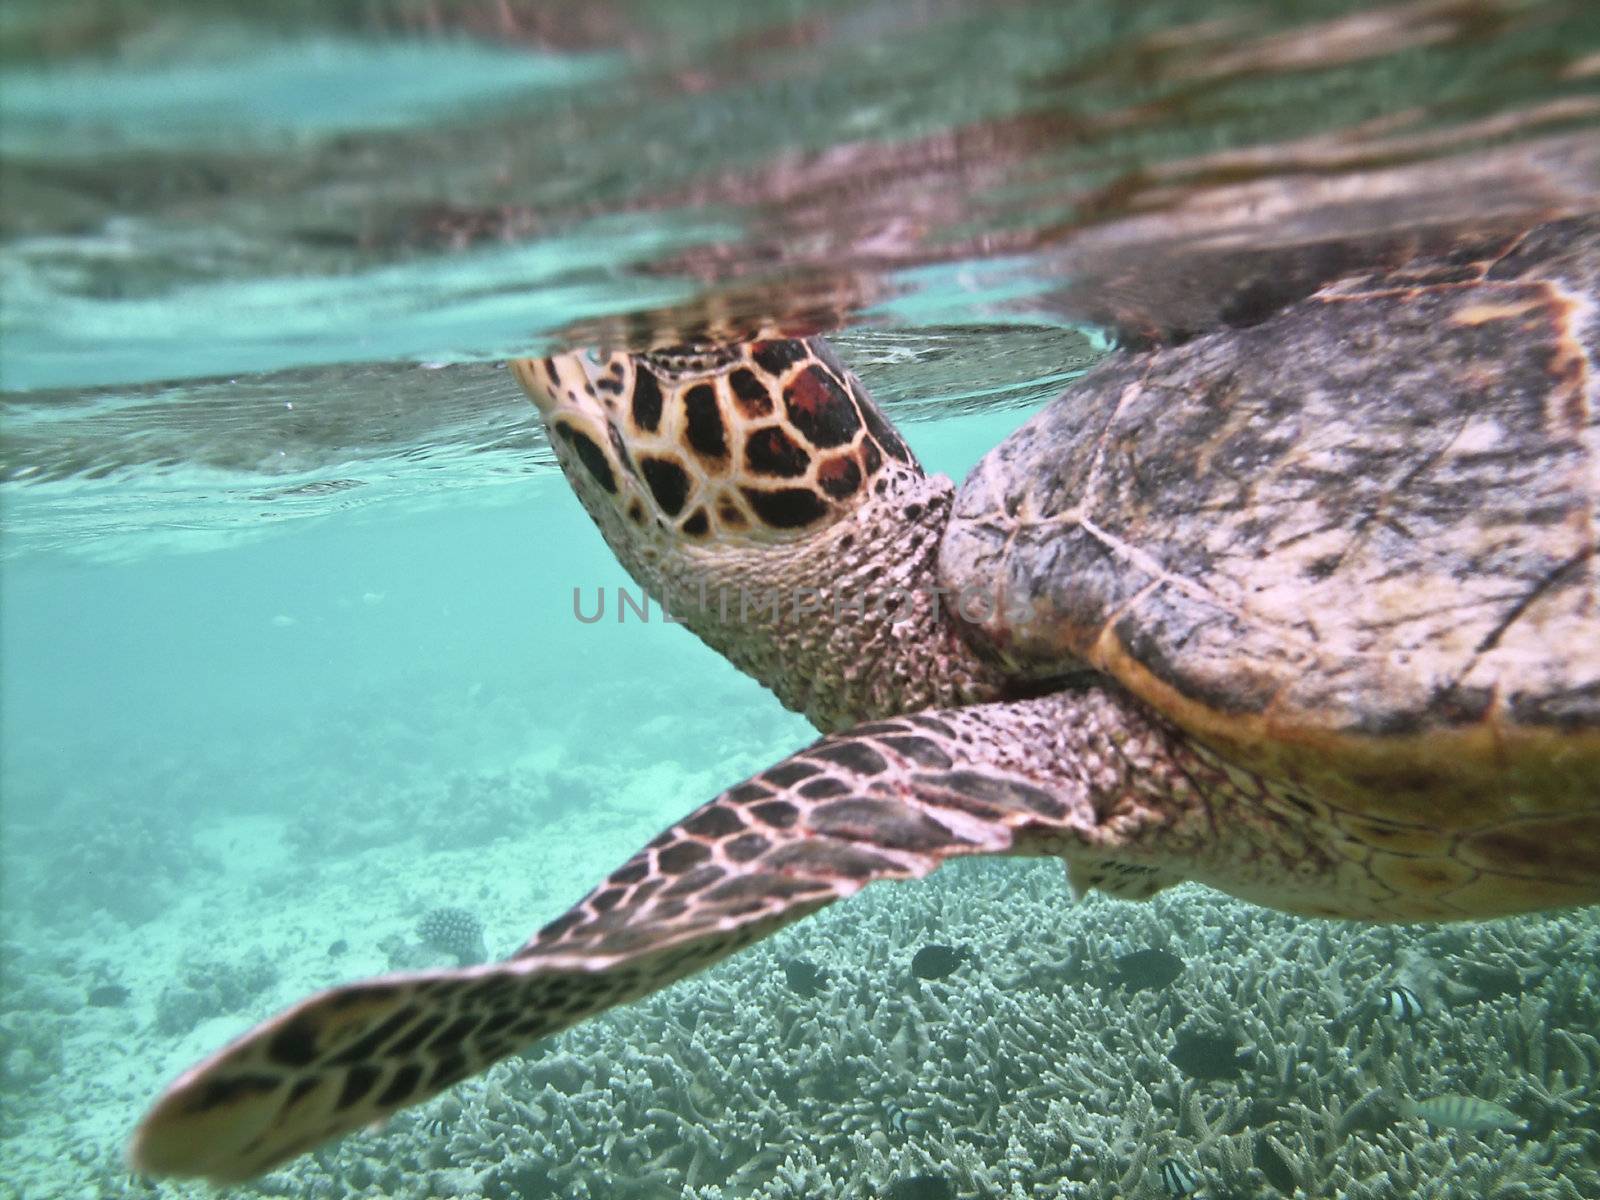 Sea turtle is swimming over a coral reef and is catching breath above the water level